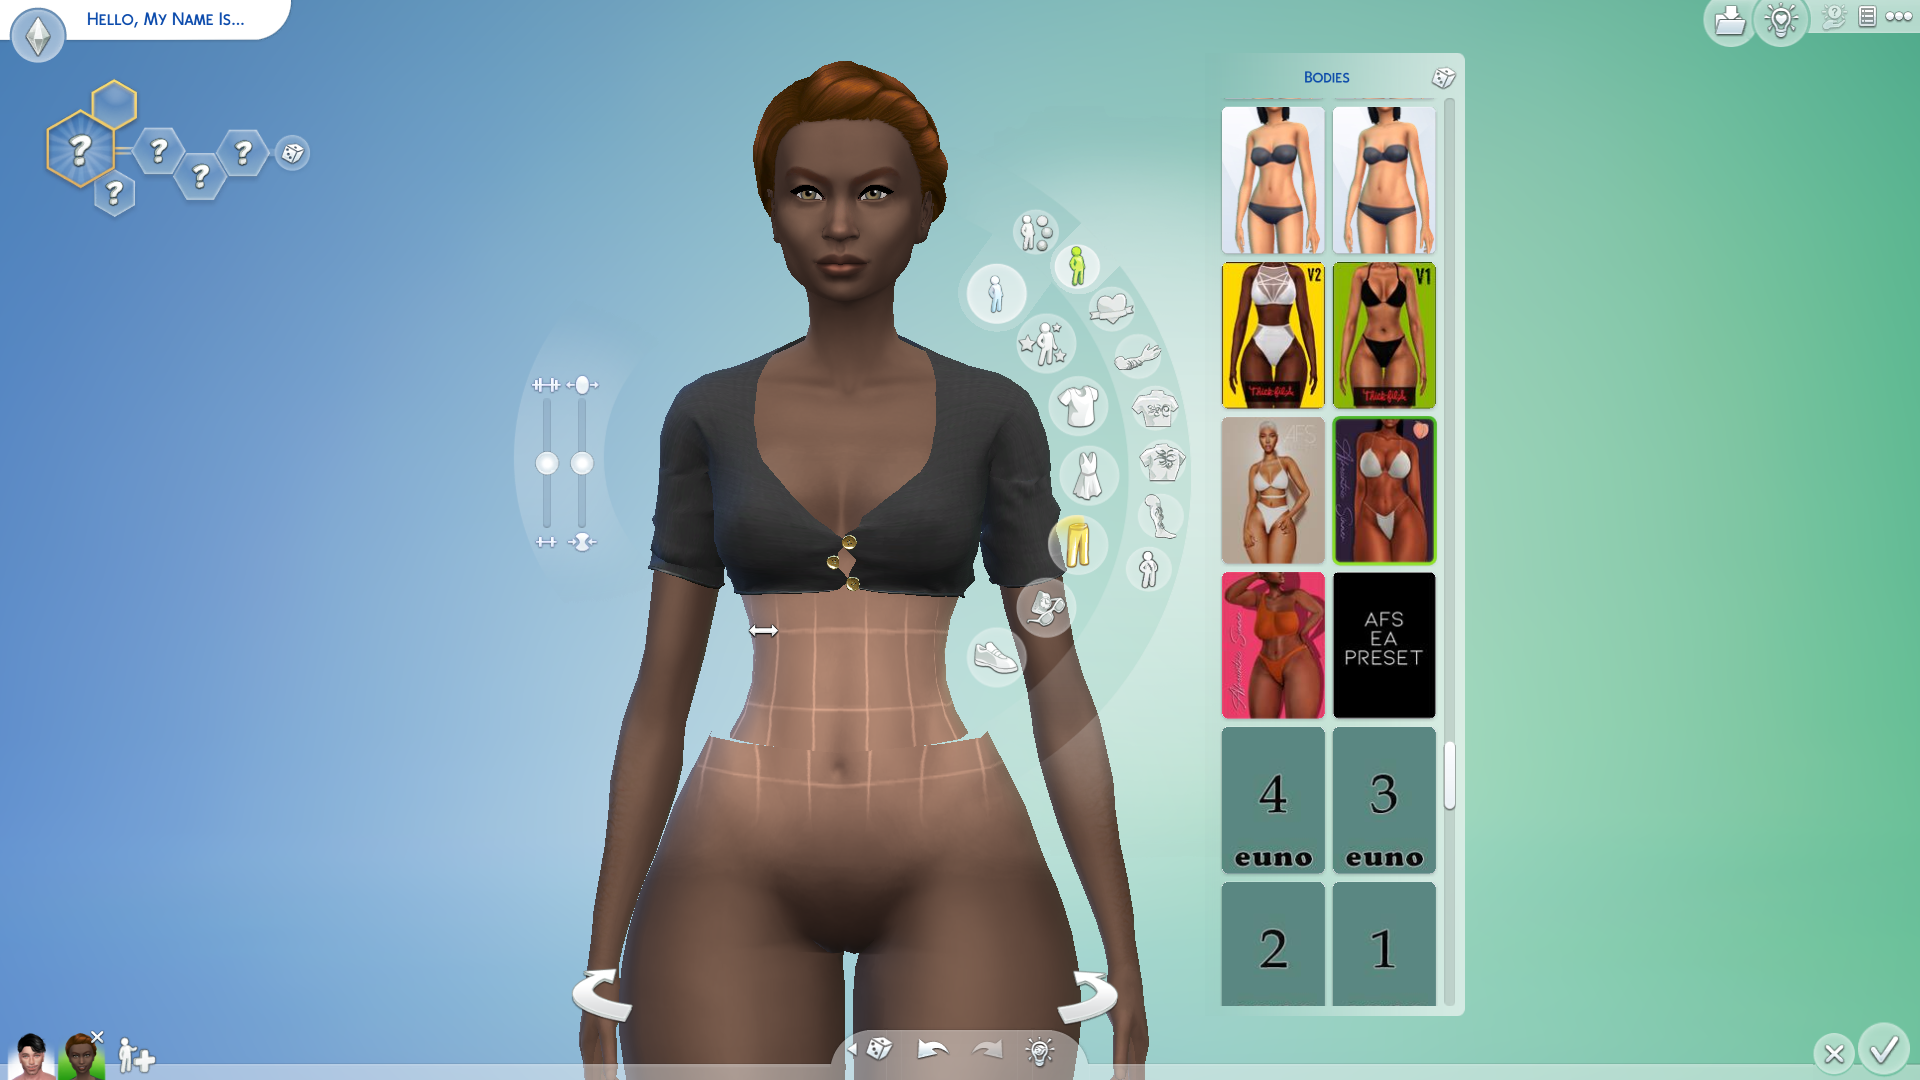 Female body hips glitching. - The Sims 4 Technical Support - LoversLab